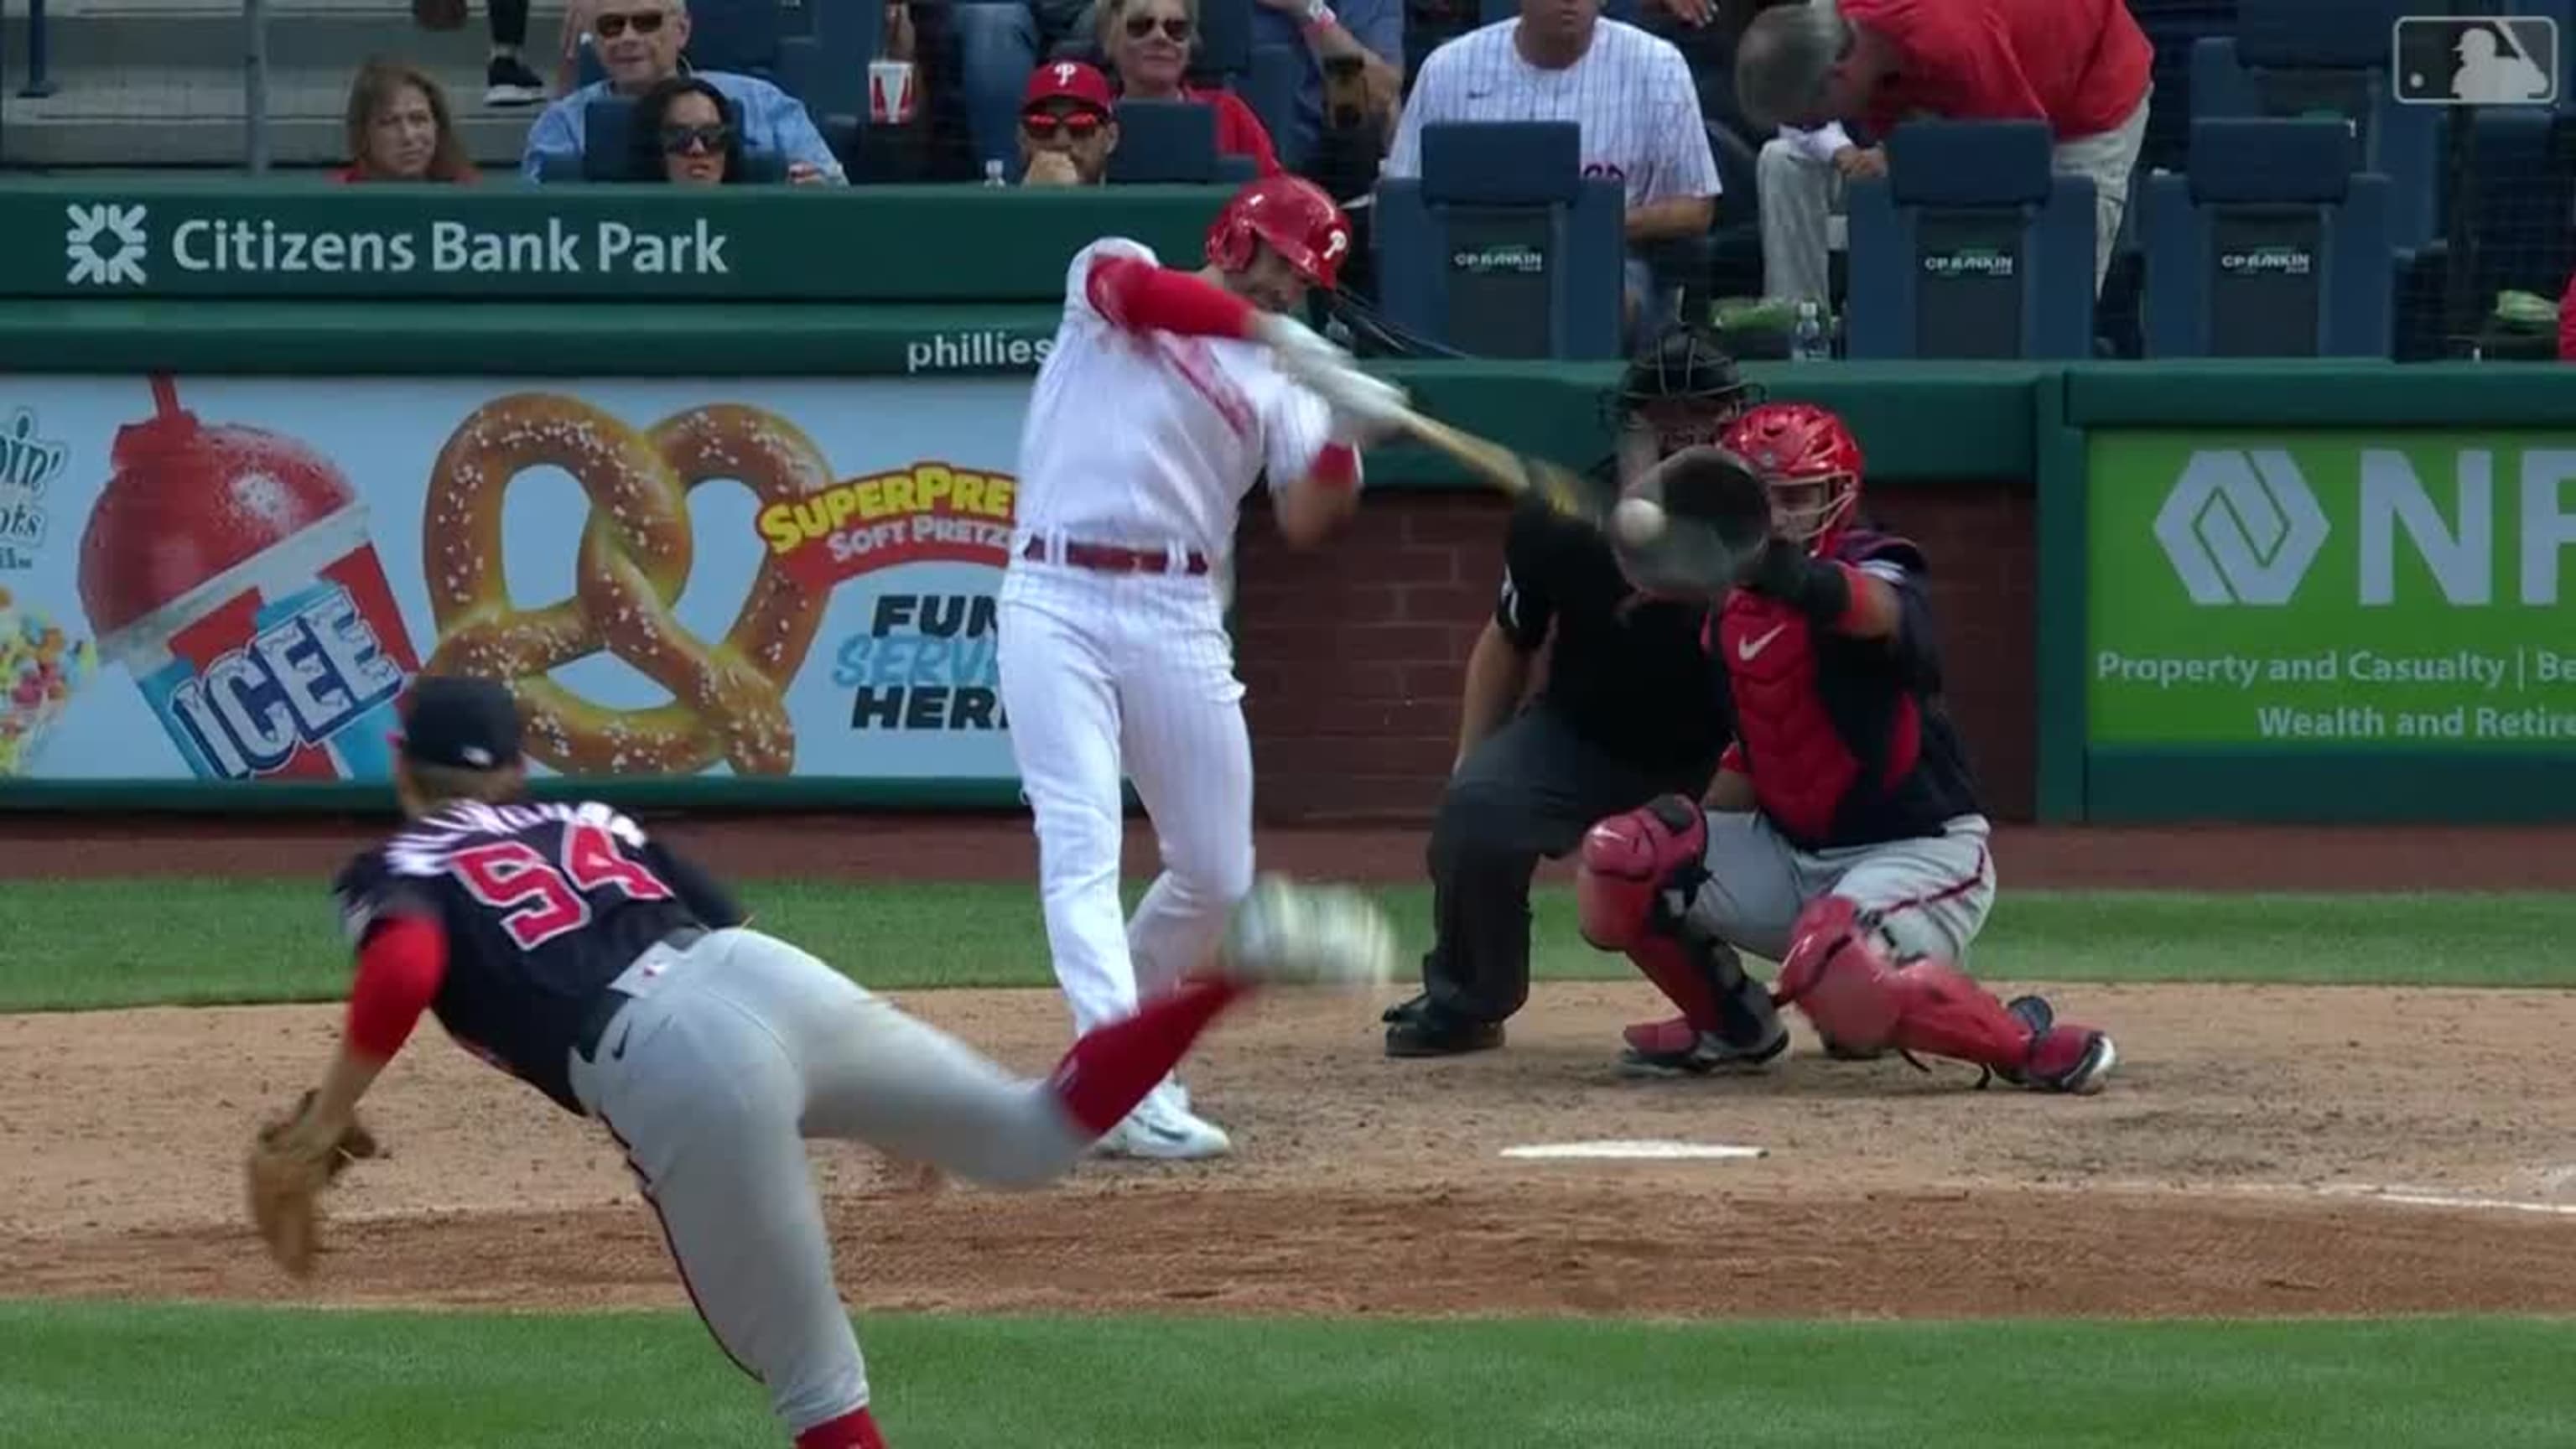 Schwarber hits 2 HRs; Phils split with Nats to lead Brewers